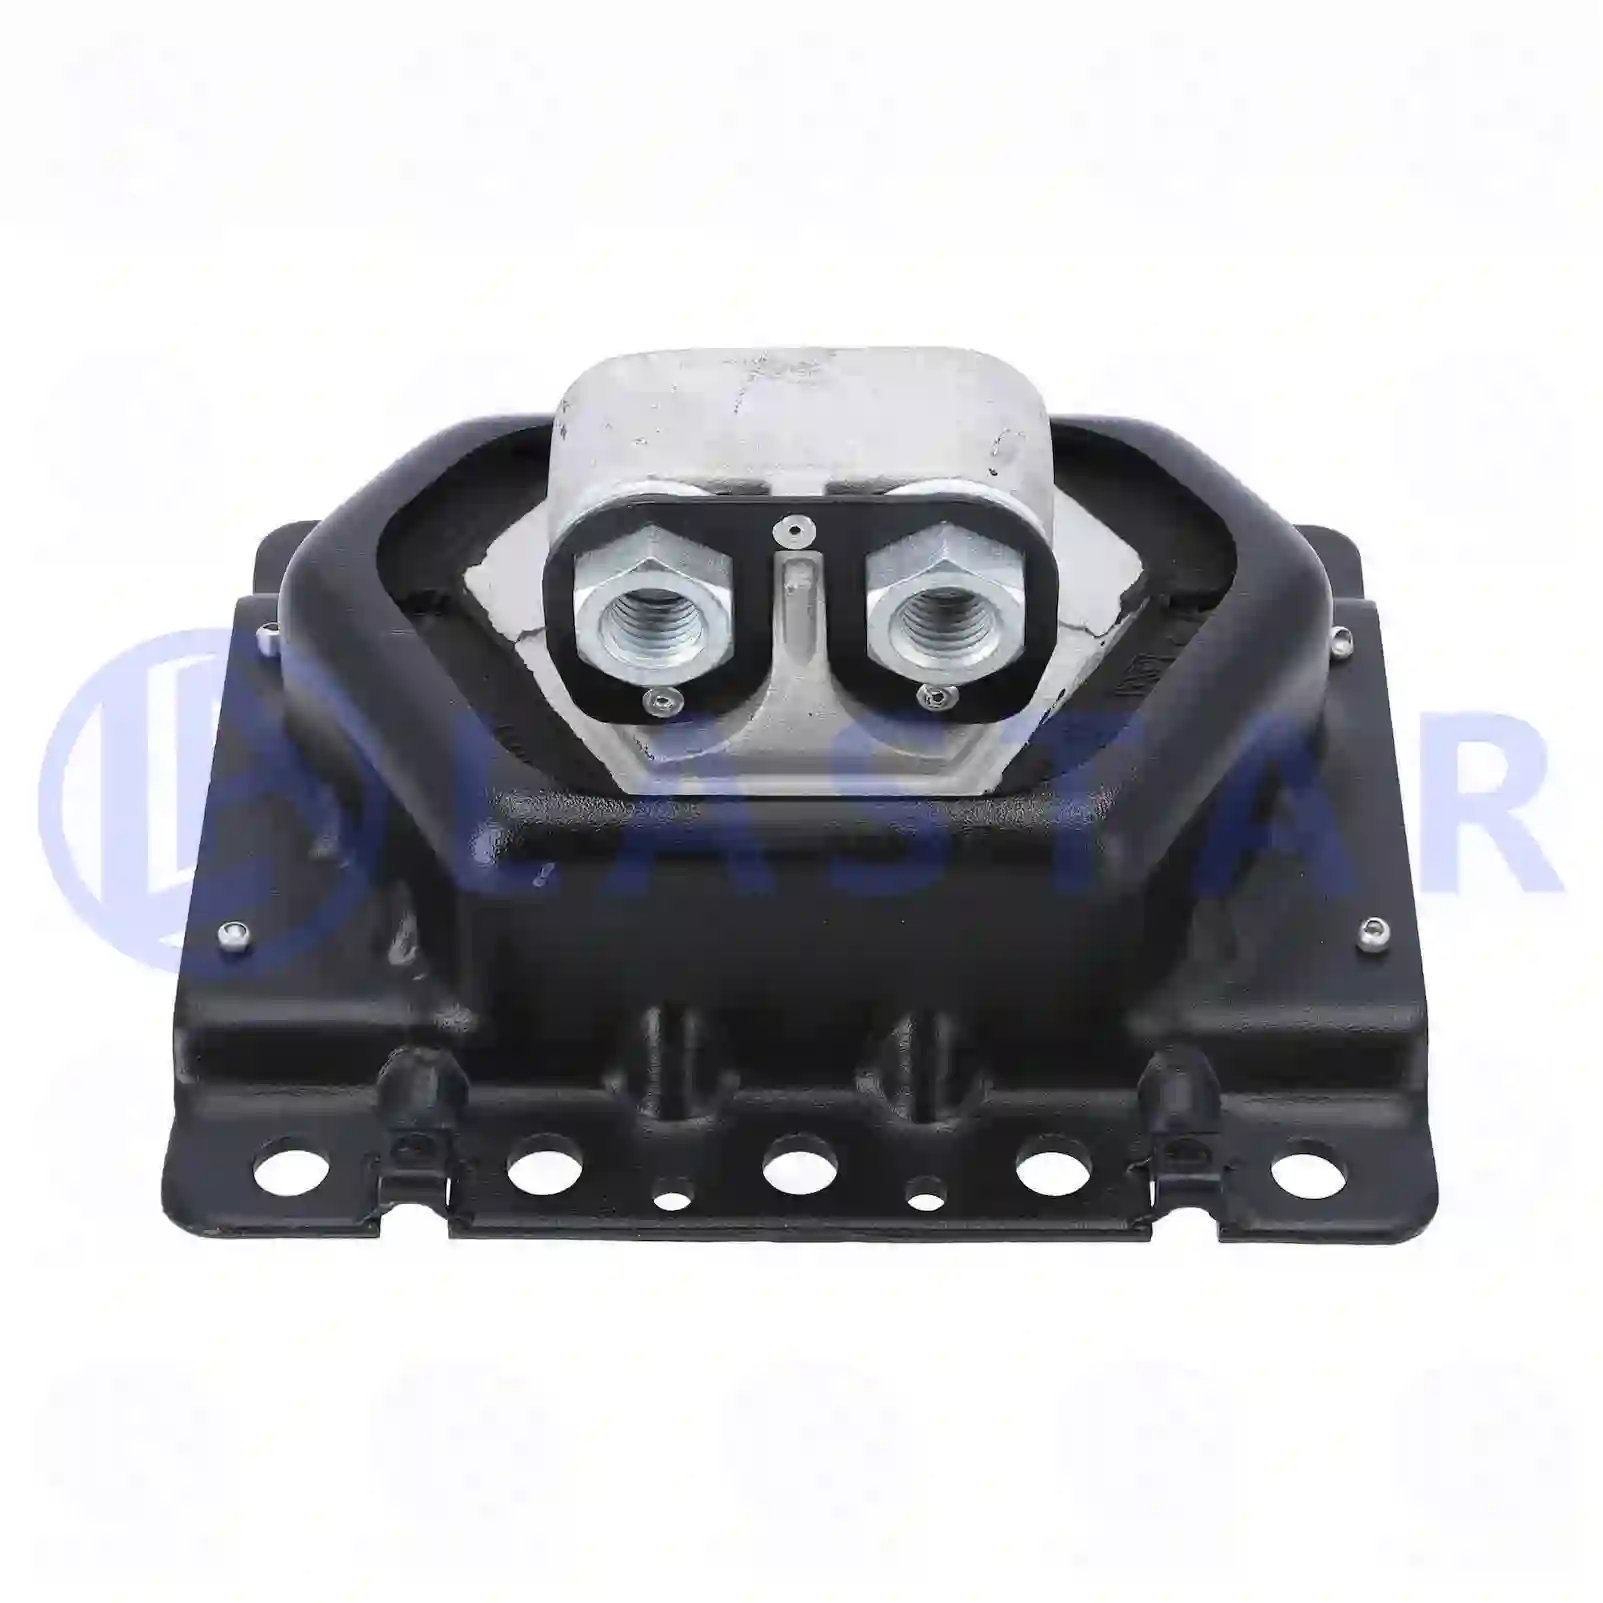 Engine mounting, rear, 77703420, 7420499470, 7420796970, 7420796971, 20499470, 20499473, 20796970 ||  77703420 Lastar Spare Part | Truck Spare Parts, Auotomotive Spare Parts Engine mounting, rear, 77703420, 7420499470, 7420796970, 7420796971, 20499470, 20499473, 20796970 ||  77703420 Lastar Spare Part | Truck Spare Parts, Auotomotive Spare Parts